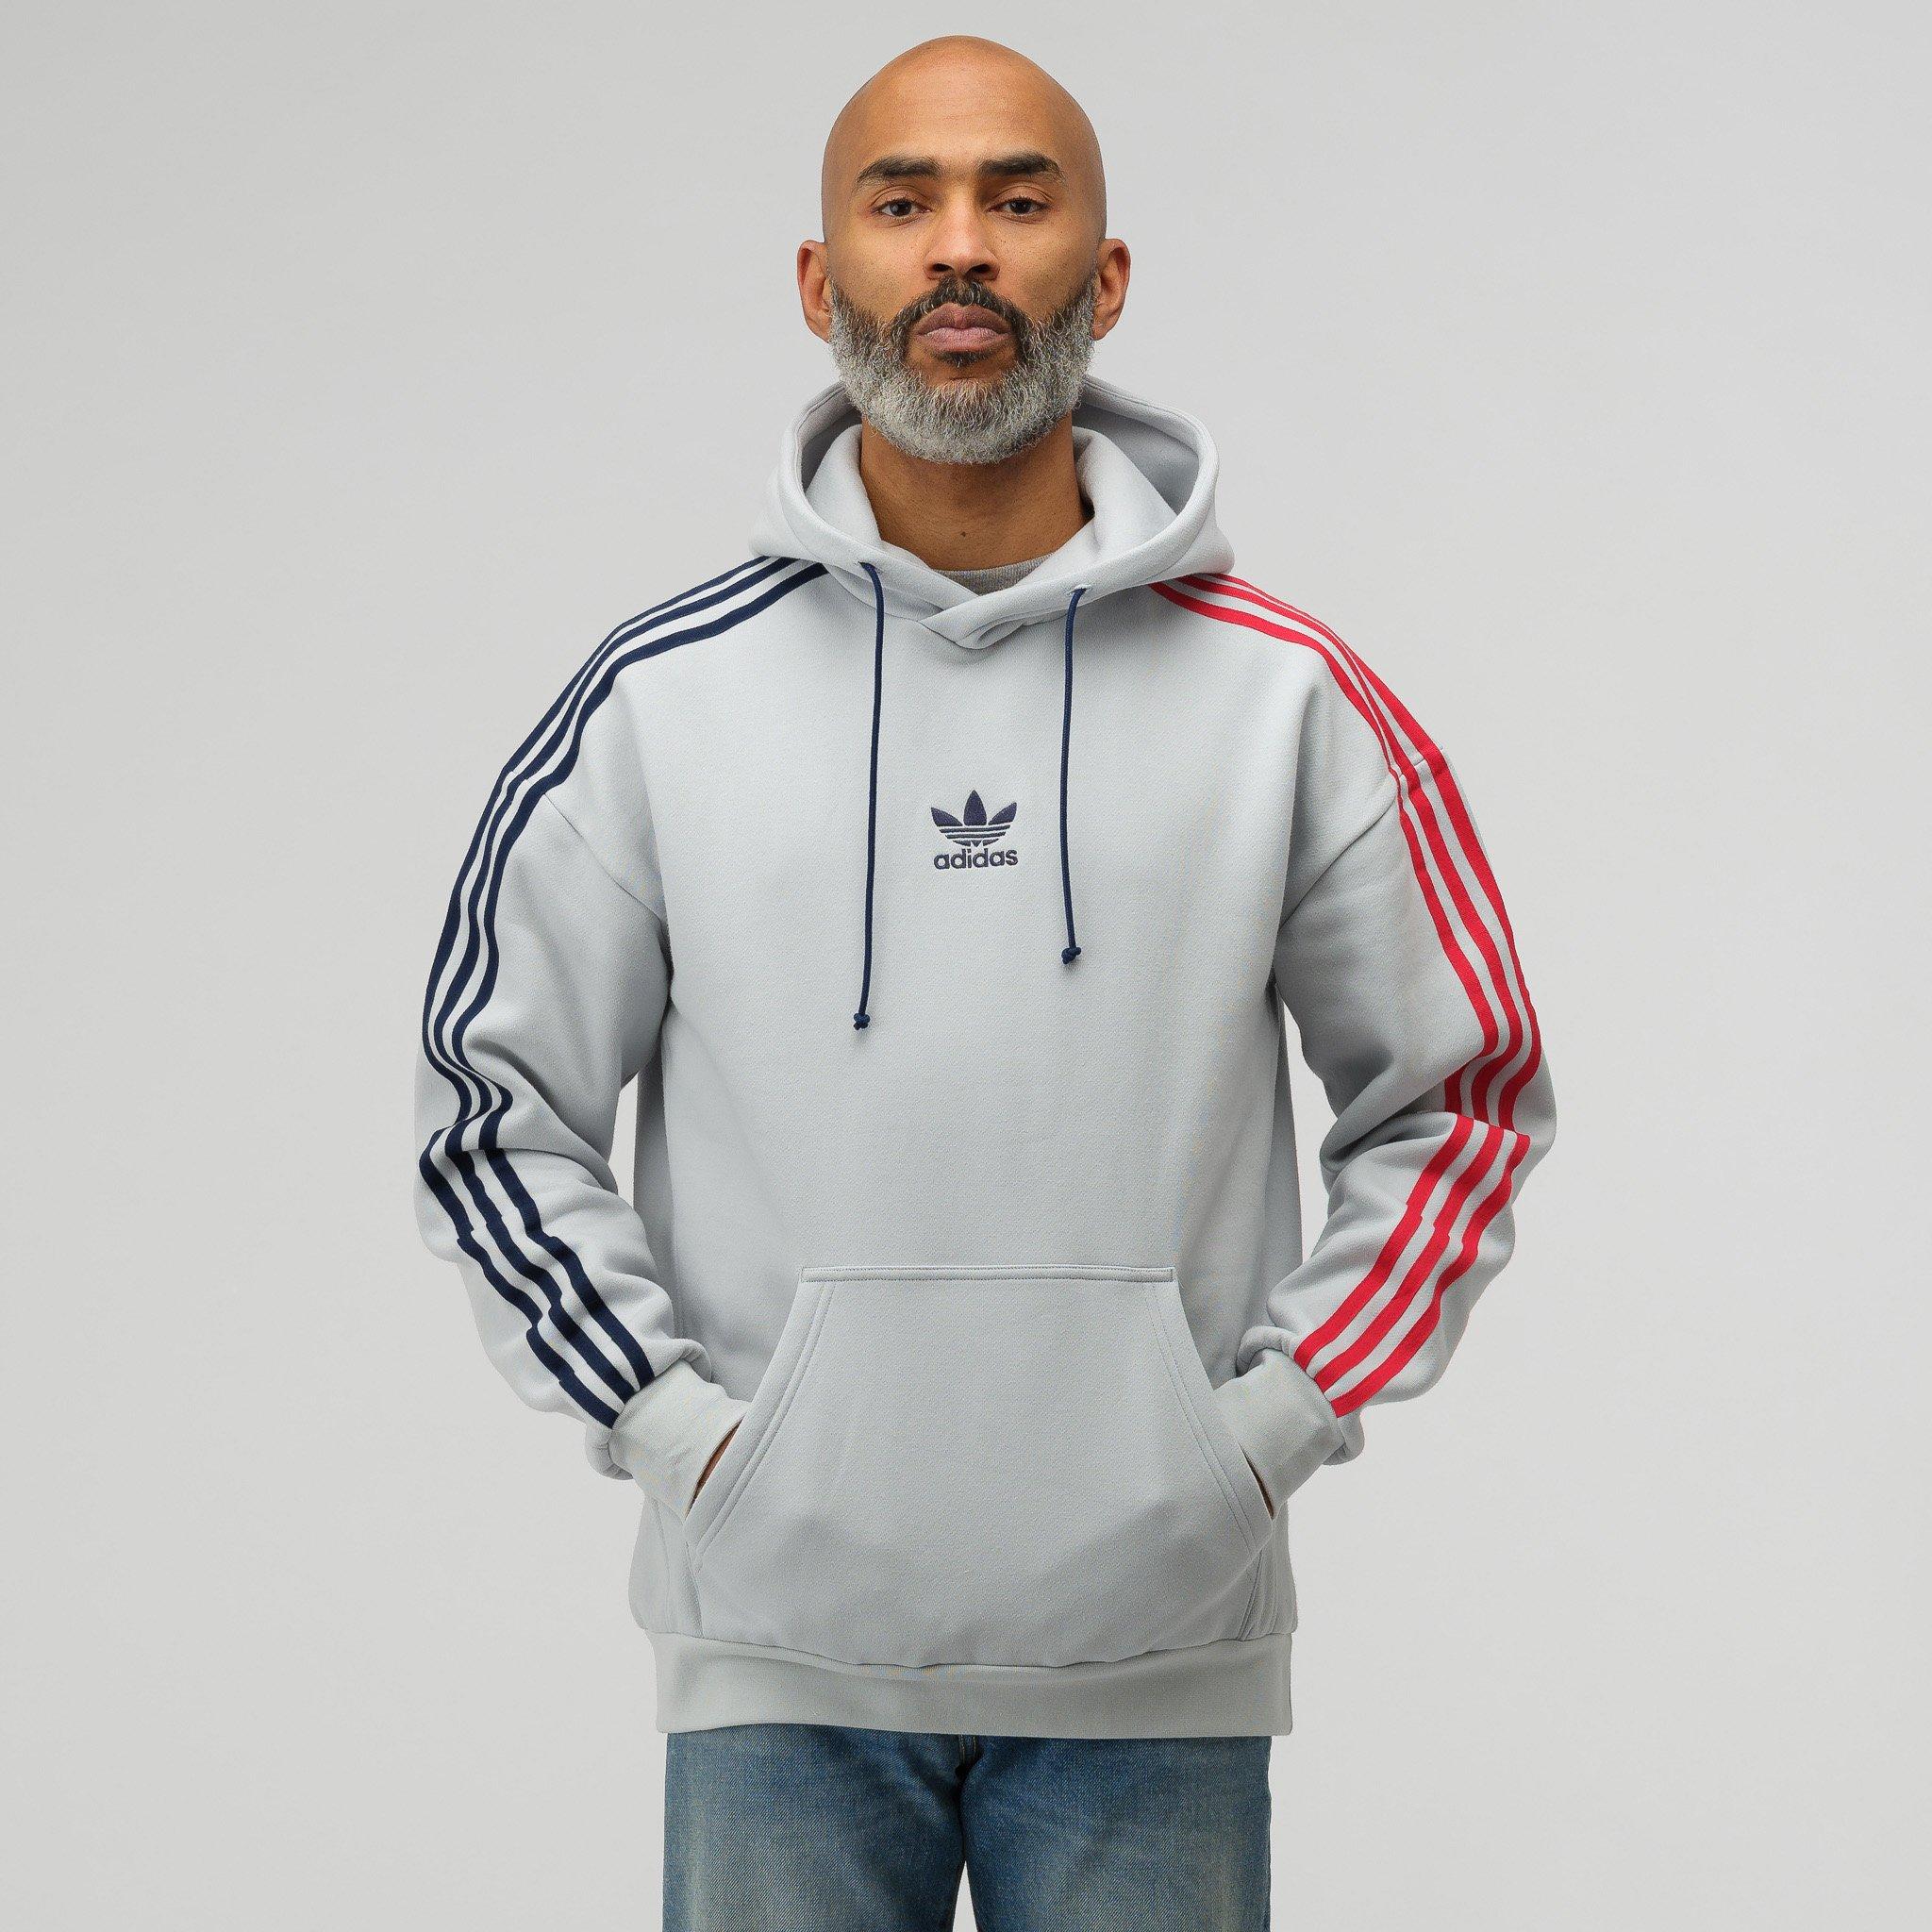 adidas Cotton 3 Stripe Hoodie In Clear Grey in Gray for Men - Lyst